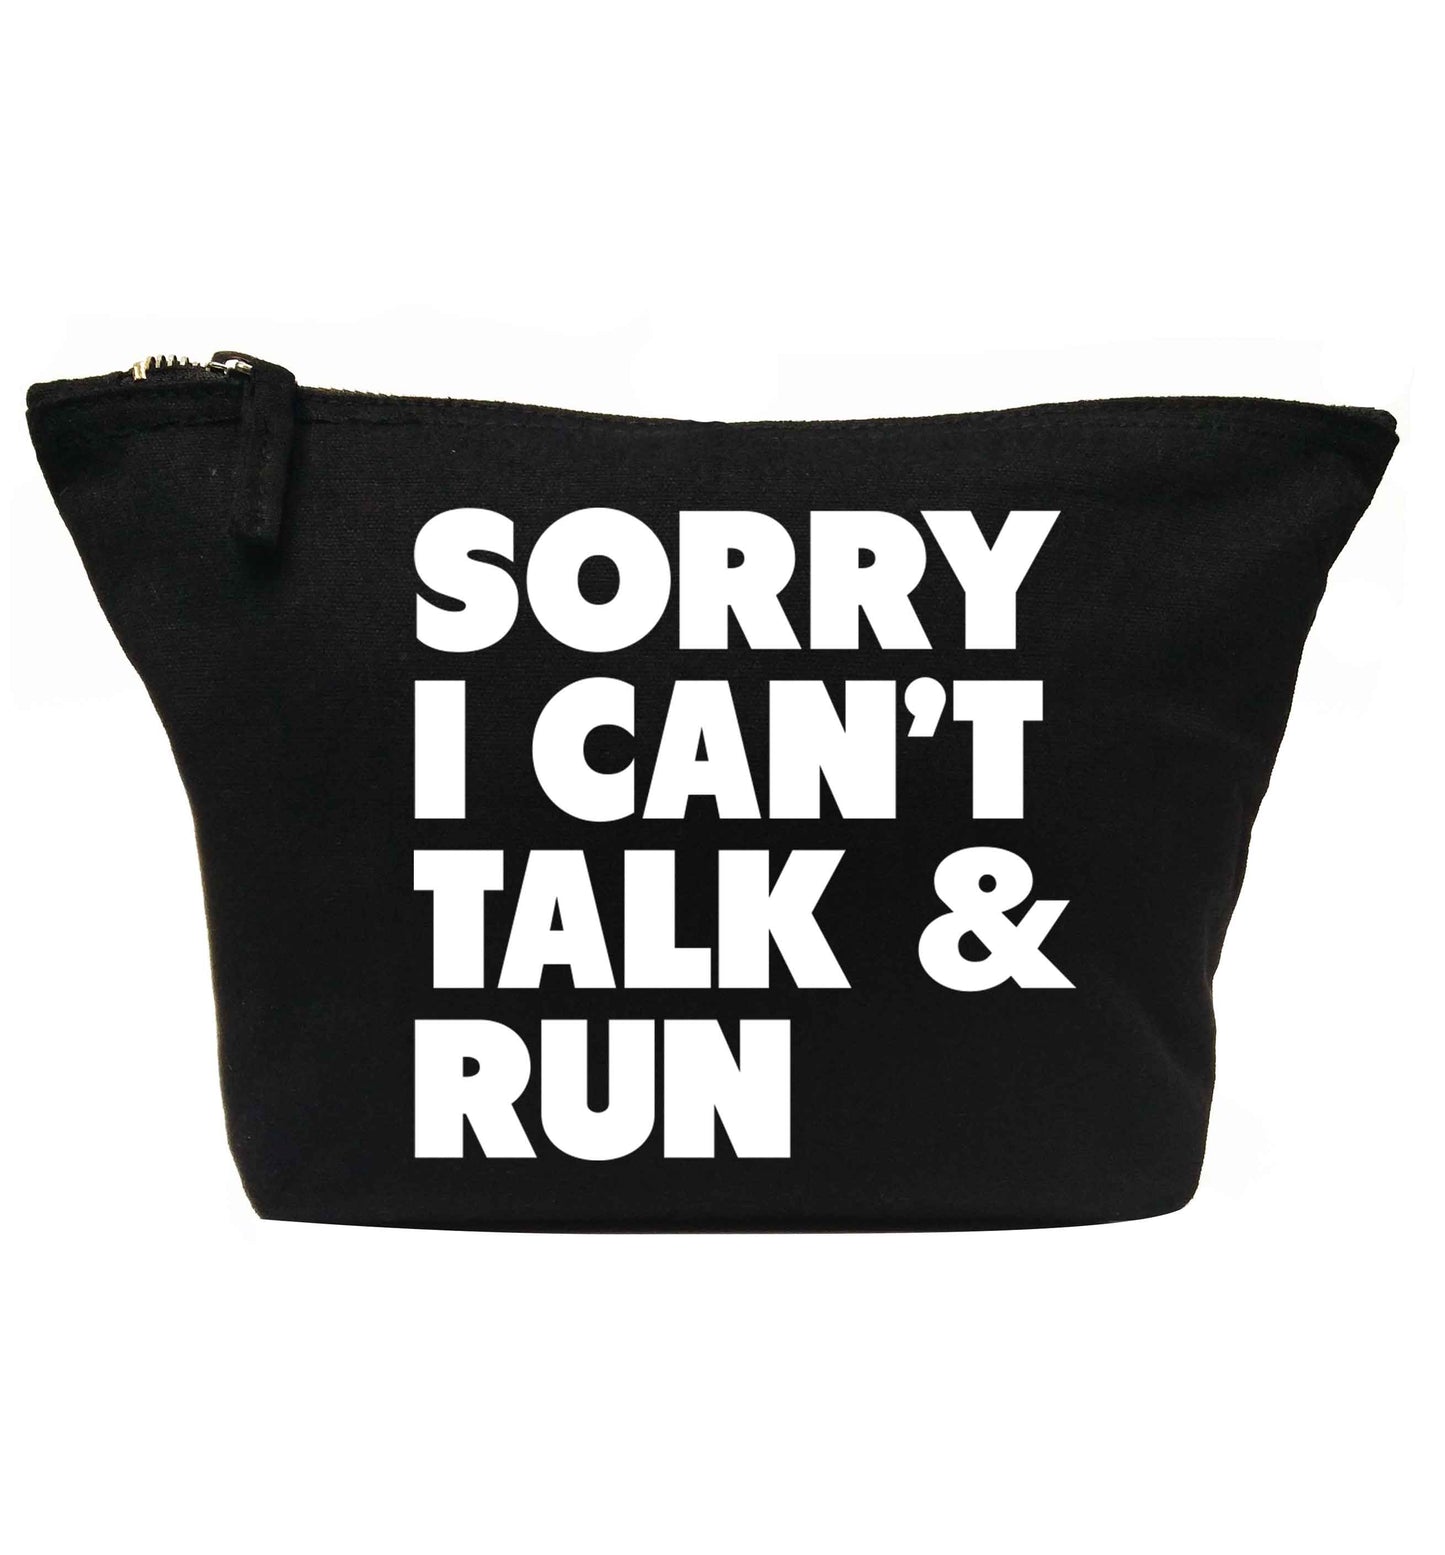 Sorry I can't talk and run | Makeup / wash bag